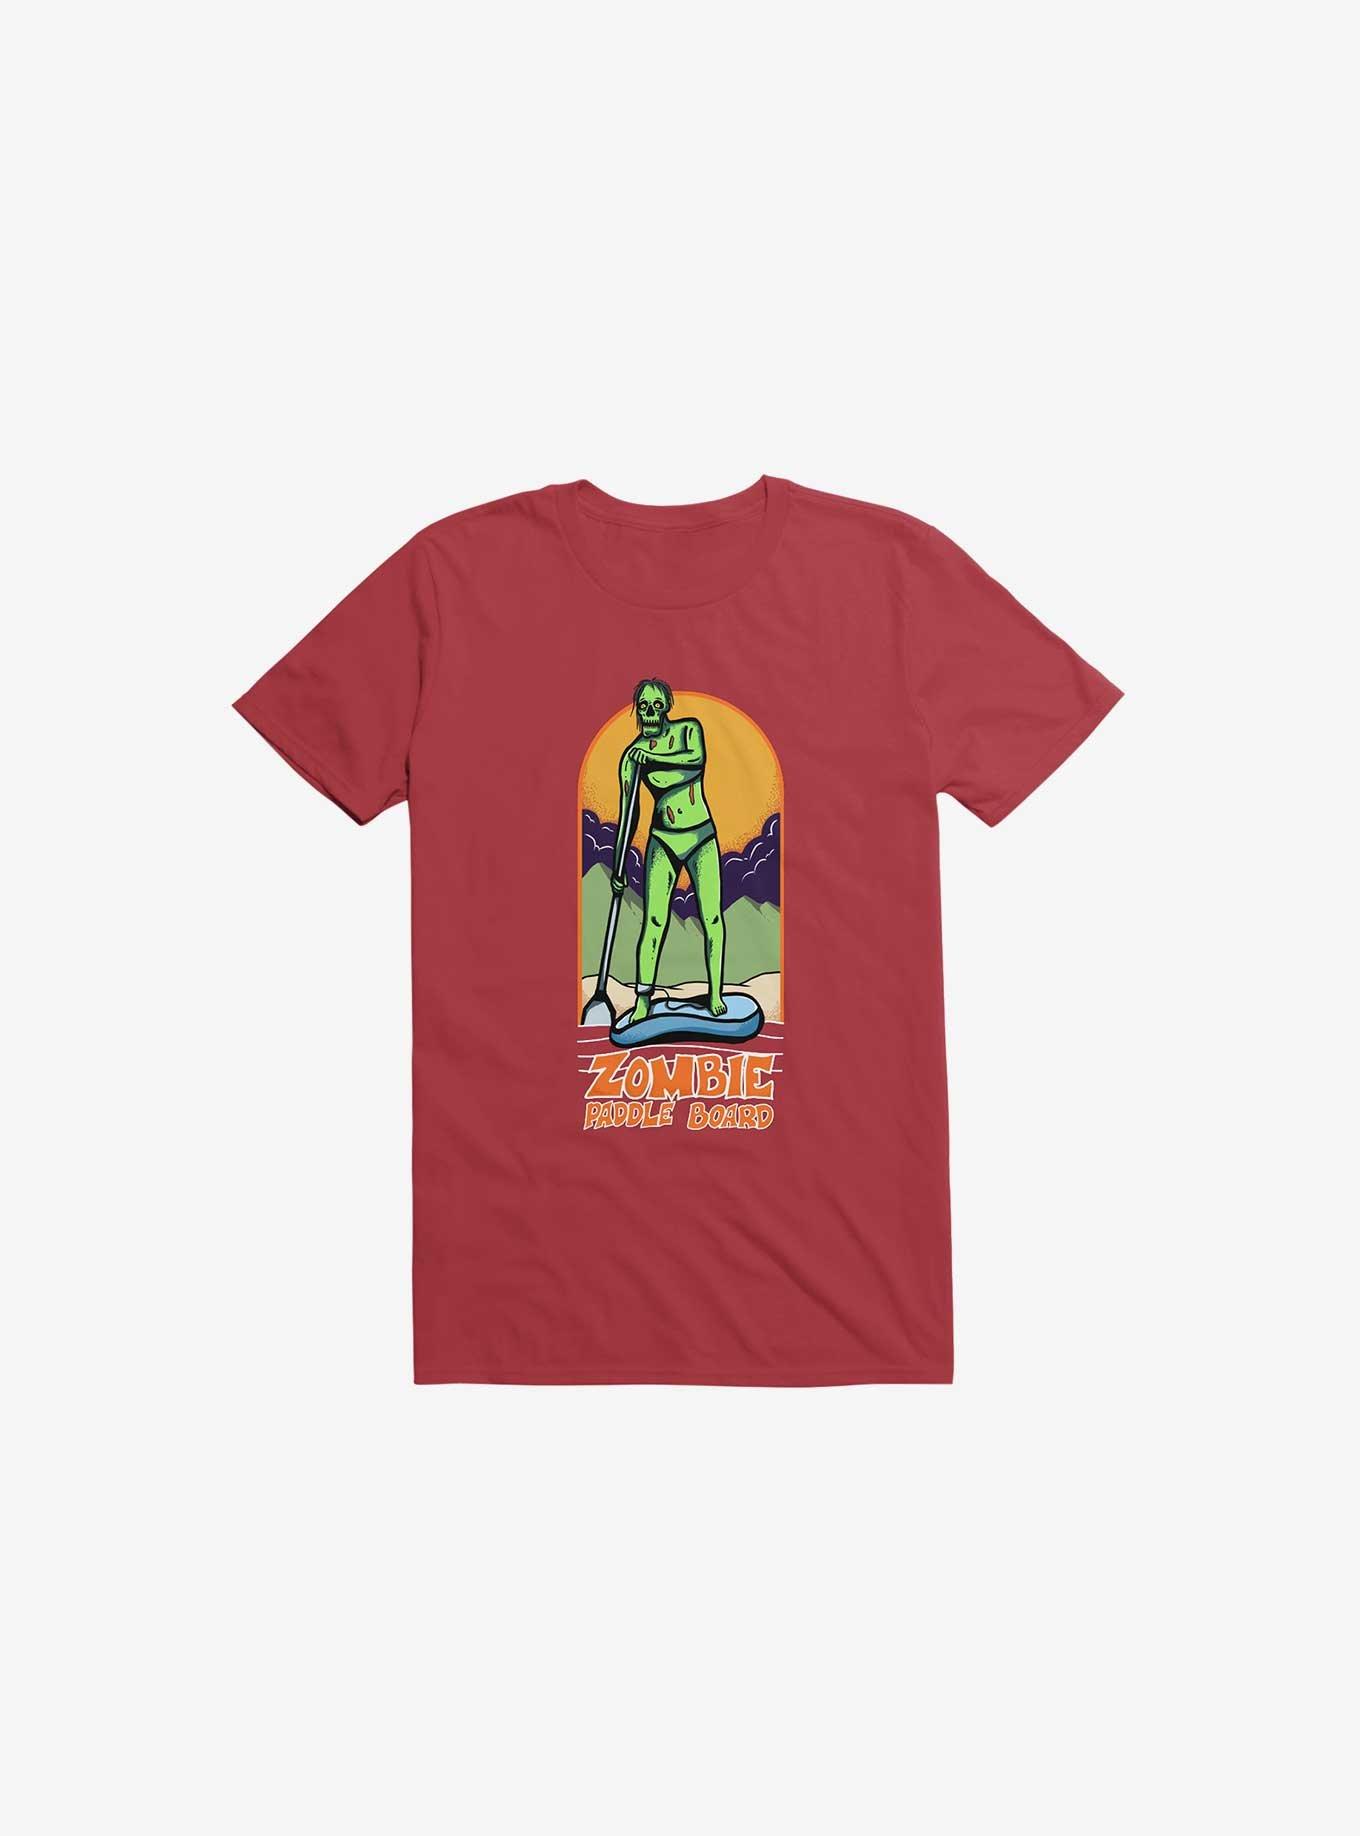 Zombie Paddle Board Red T-Shirt